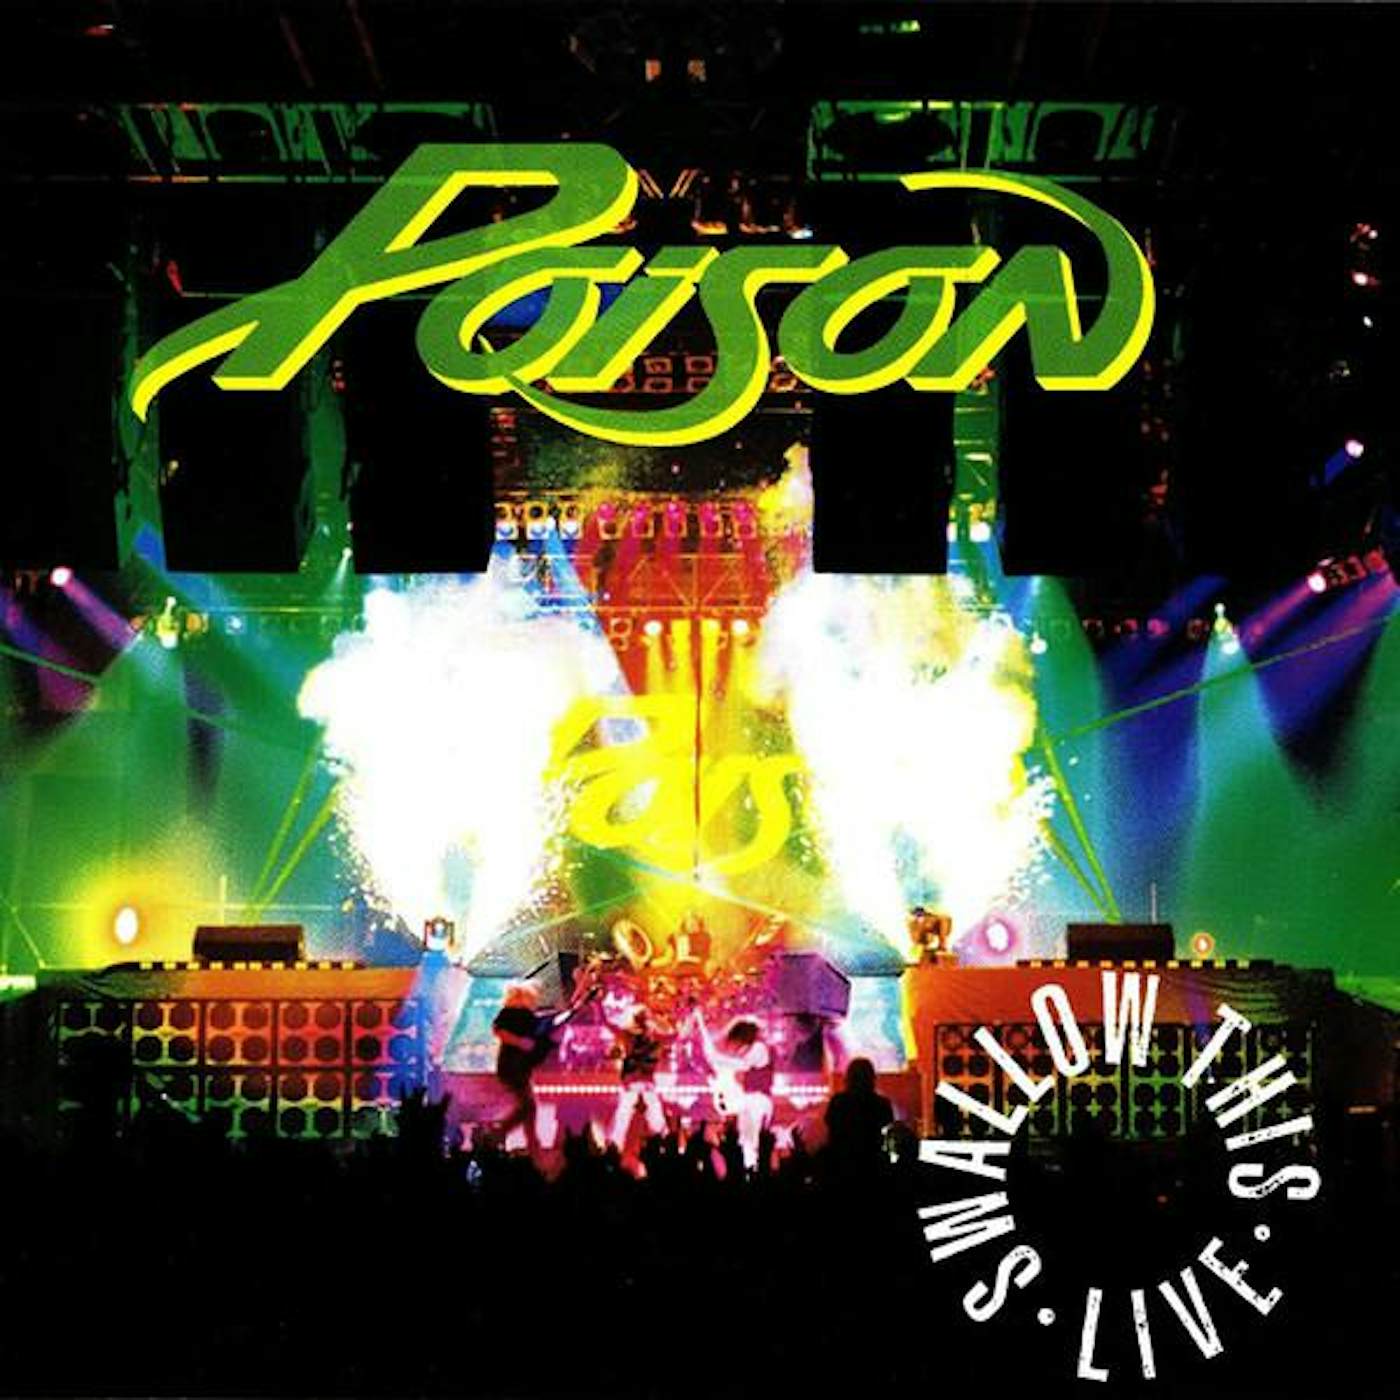 Poison SWALLOW THIS LIVE LTD CD